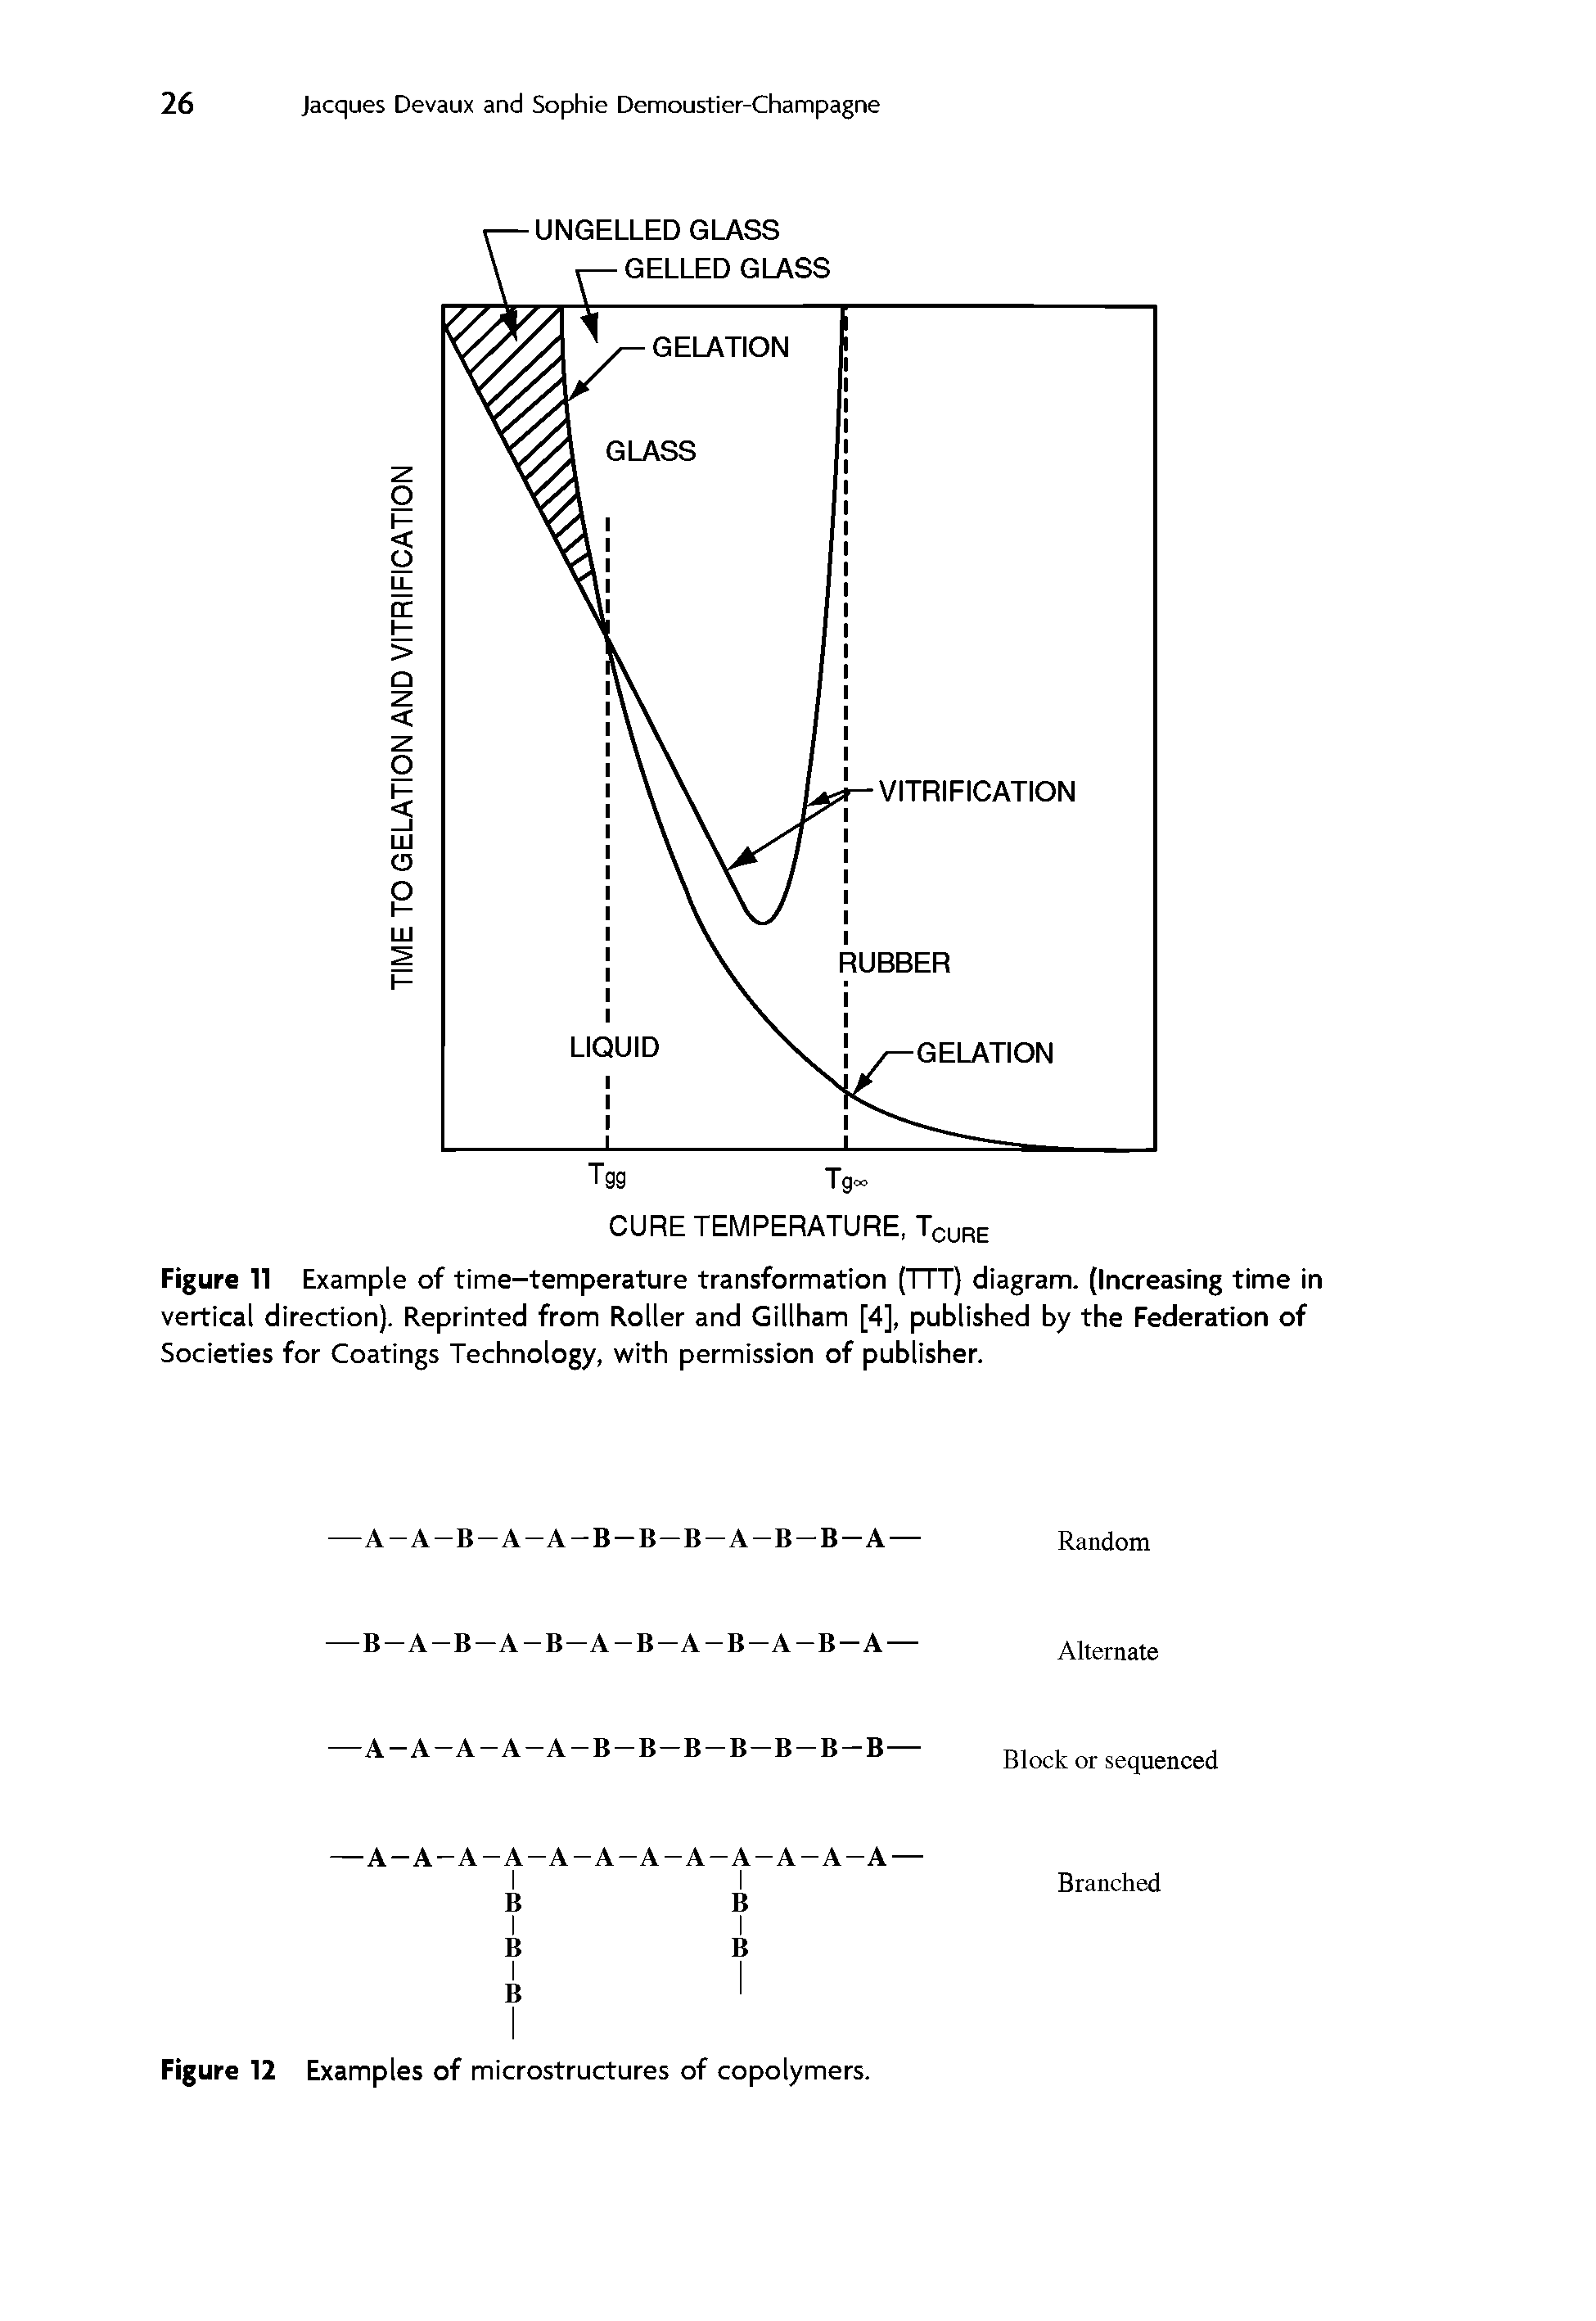 Figure 11 Example of time-temperature transformation (TTT) diagram. (Increasing time in vertical direction). Reprinted from Roller and Gillham [4], published by the Federation of Societies for Coatings Technology, with permission of publisher.